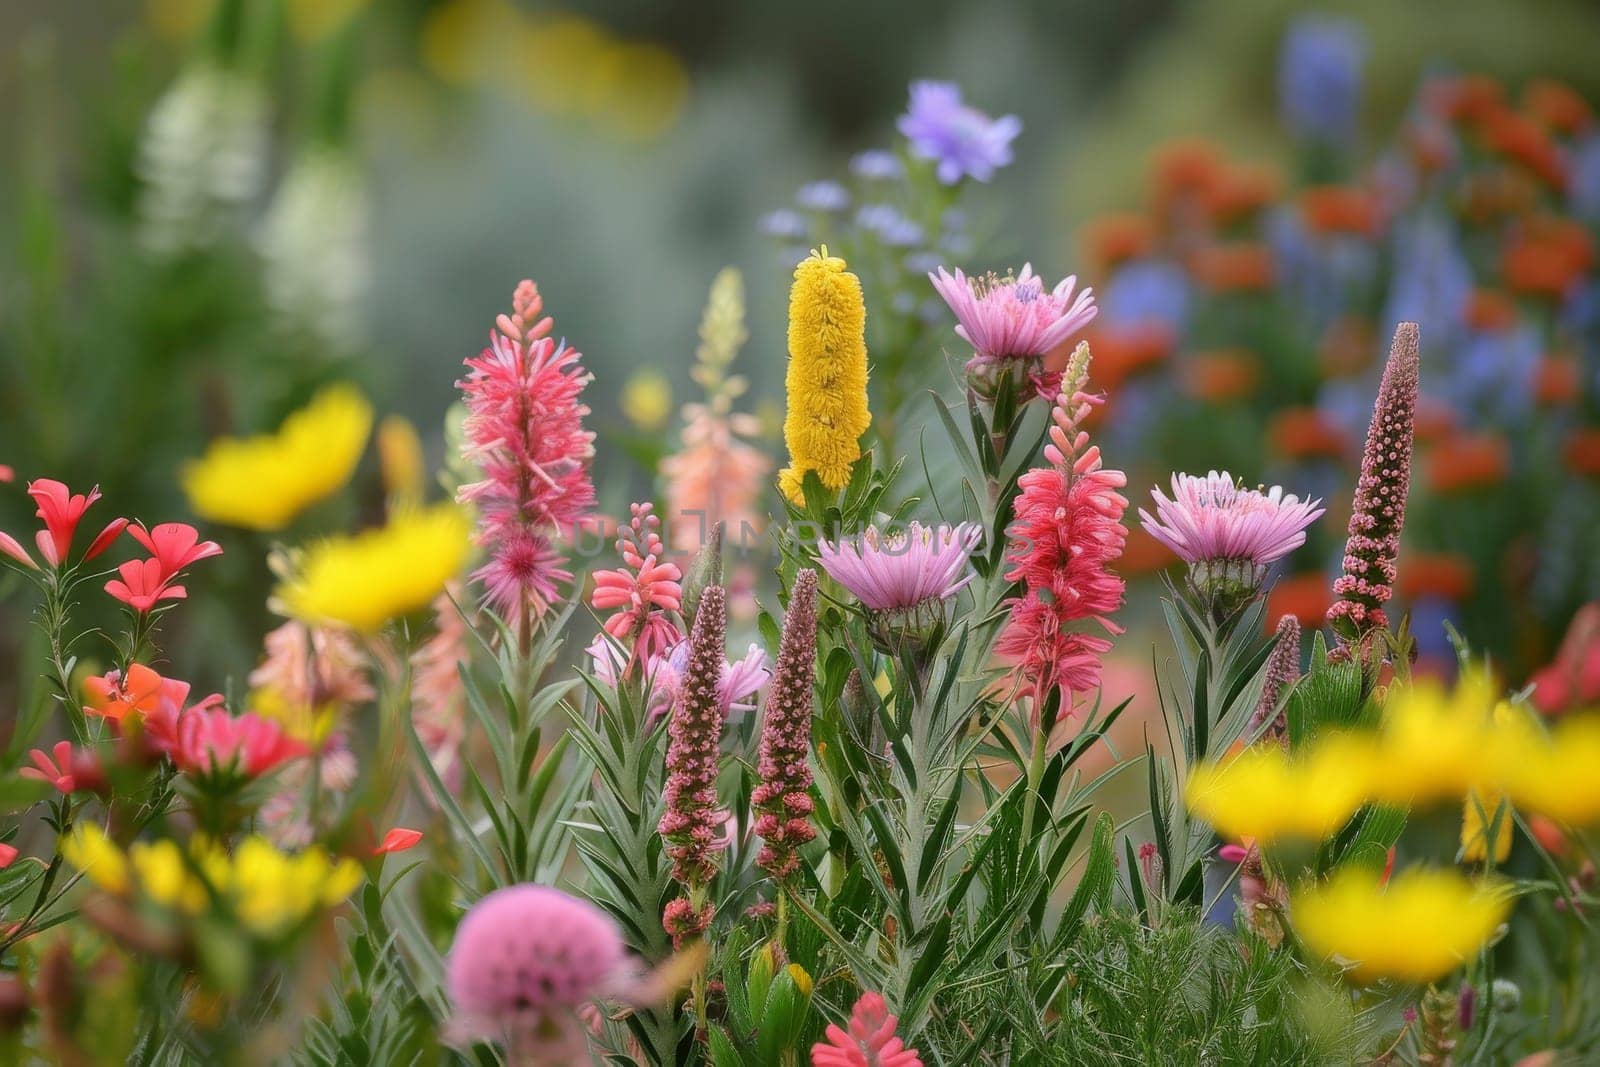 A garden with a variety of flowers including pink, yellow, and purple. The flowers are in full bloom and are arranged in a way that creates a colorful and vibrant scene